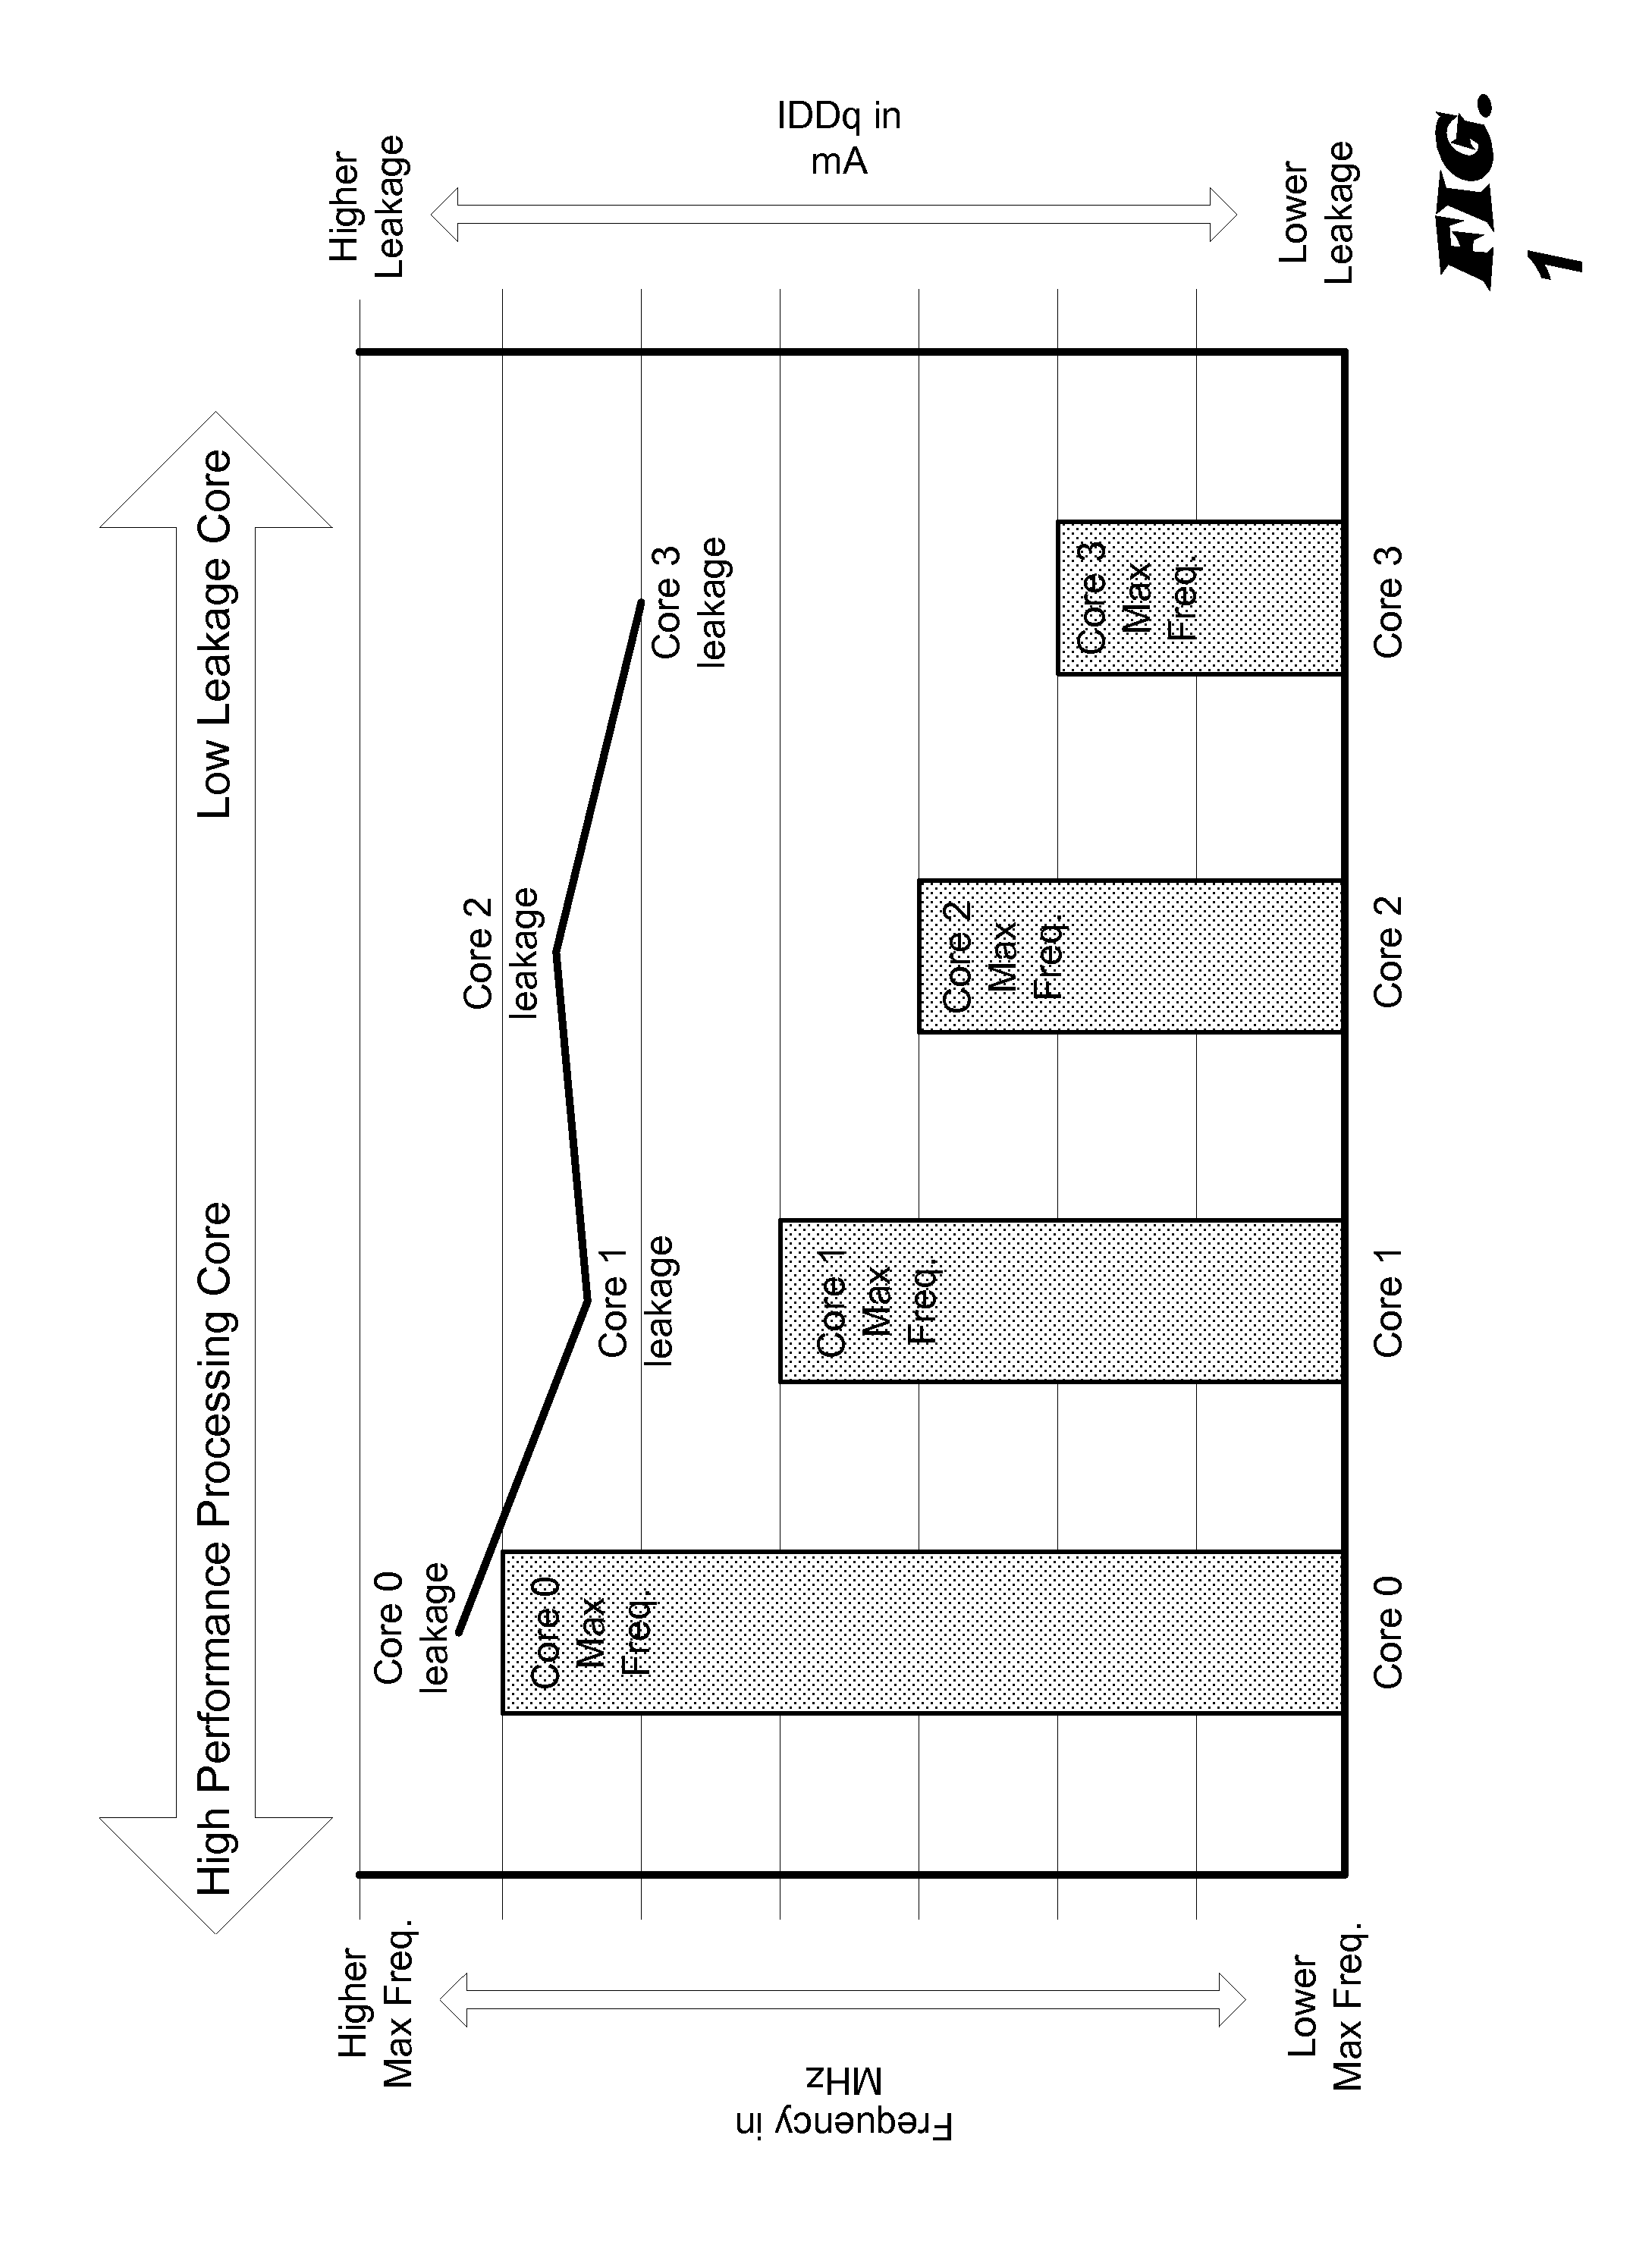 Modal workload scheduling in a heterogeneous multi-processor system on a chip